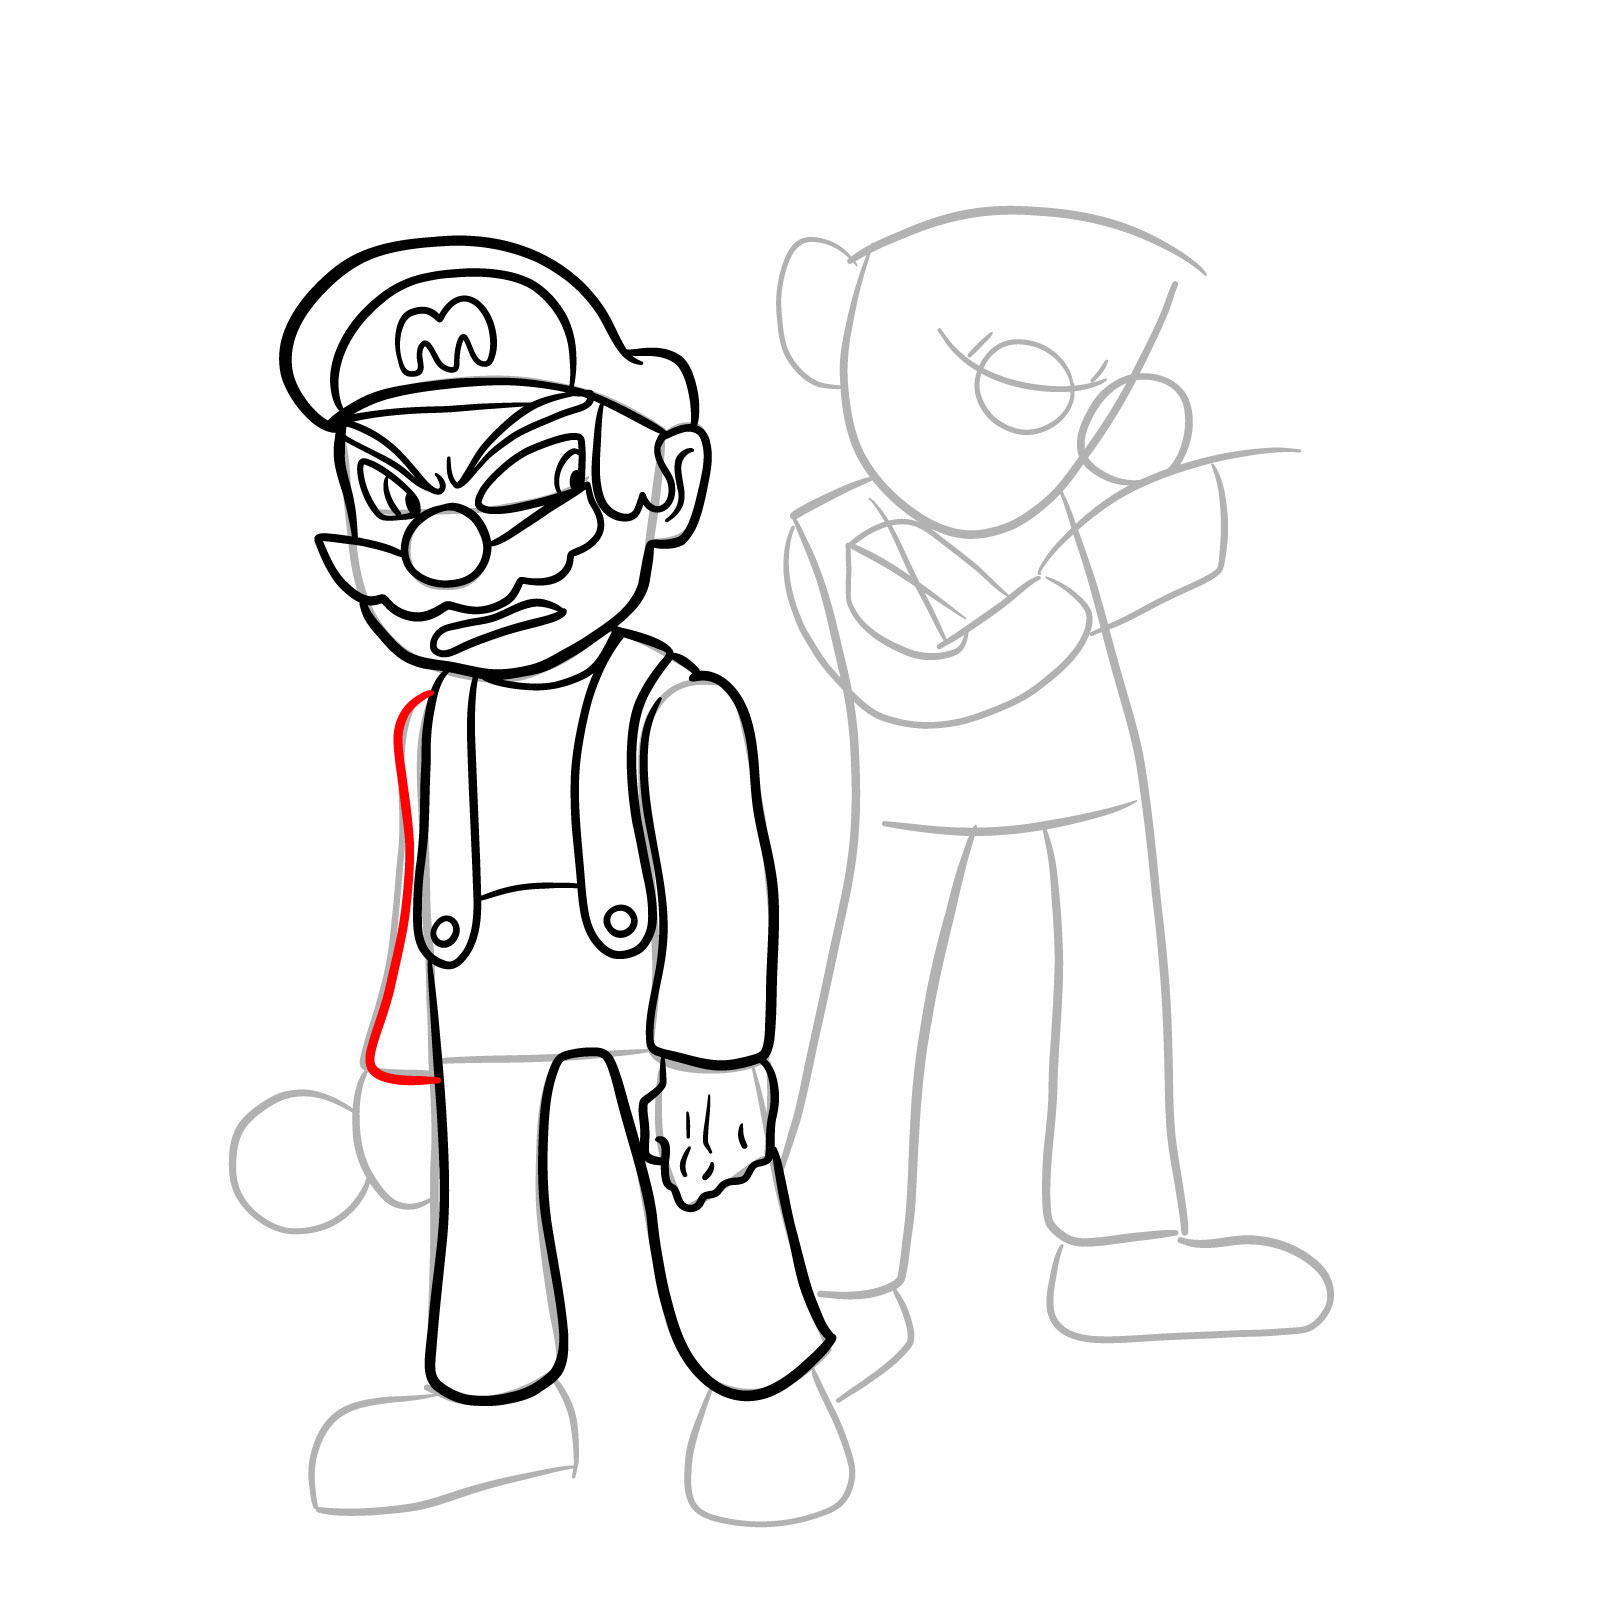 How to draw Mario and Luigi from Tails Gets Trolled - step 18